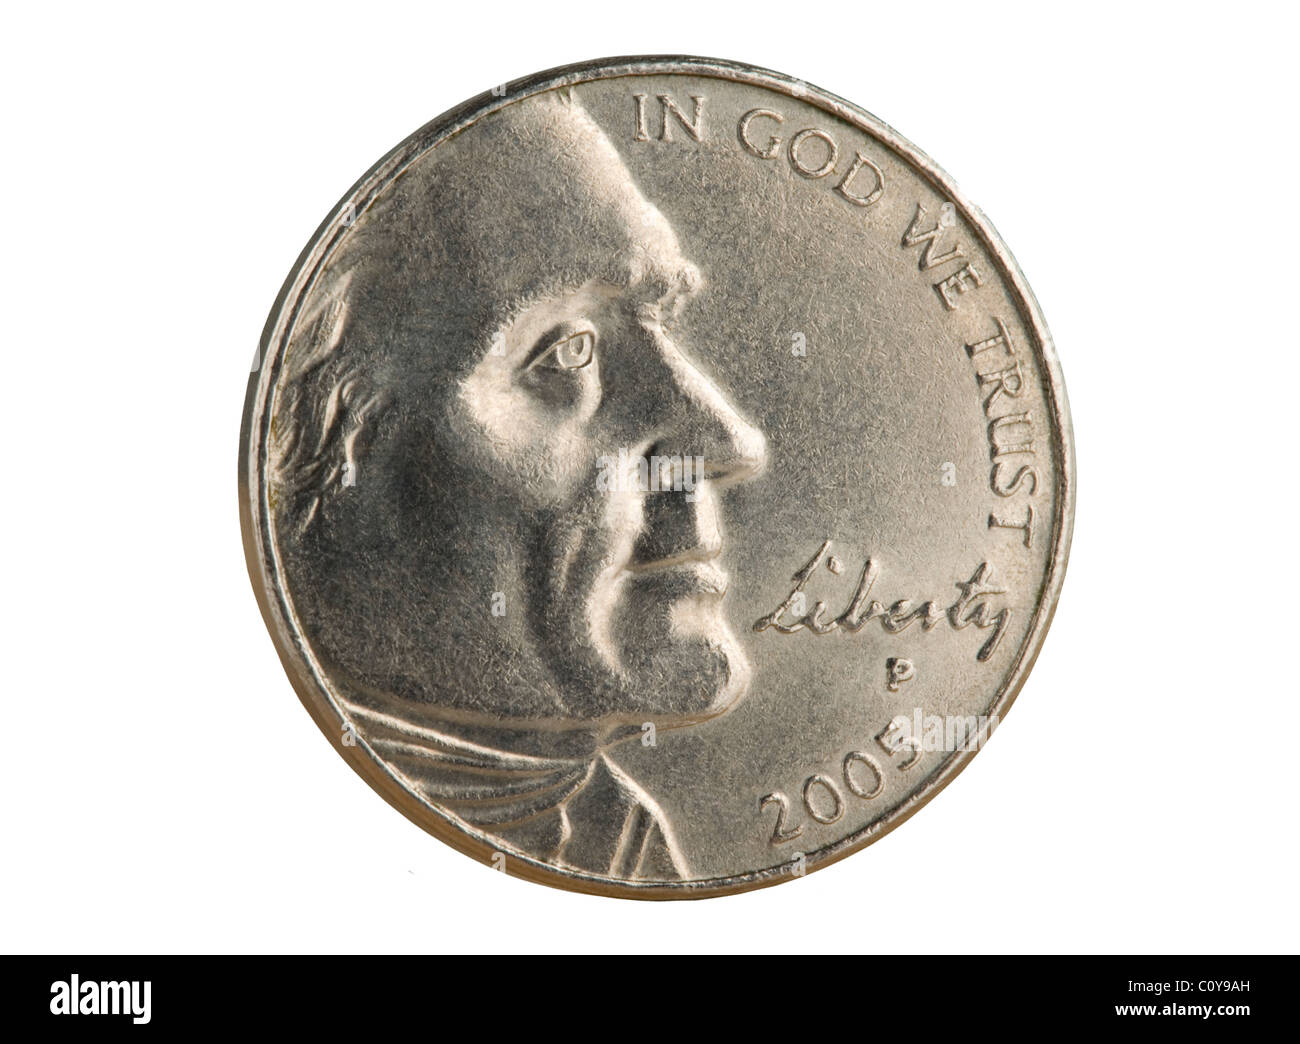 2005 US nickel coin. The face value of 5 cents is now less than the value of the metals in the coin. Stock Photo